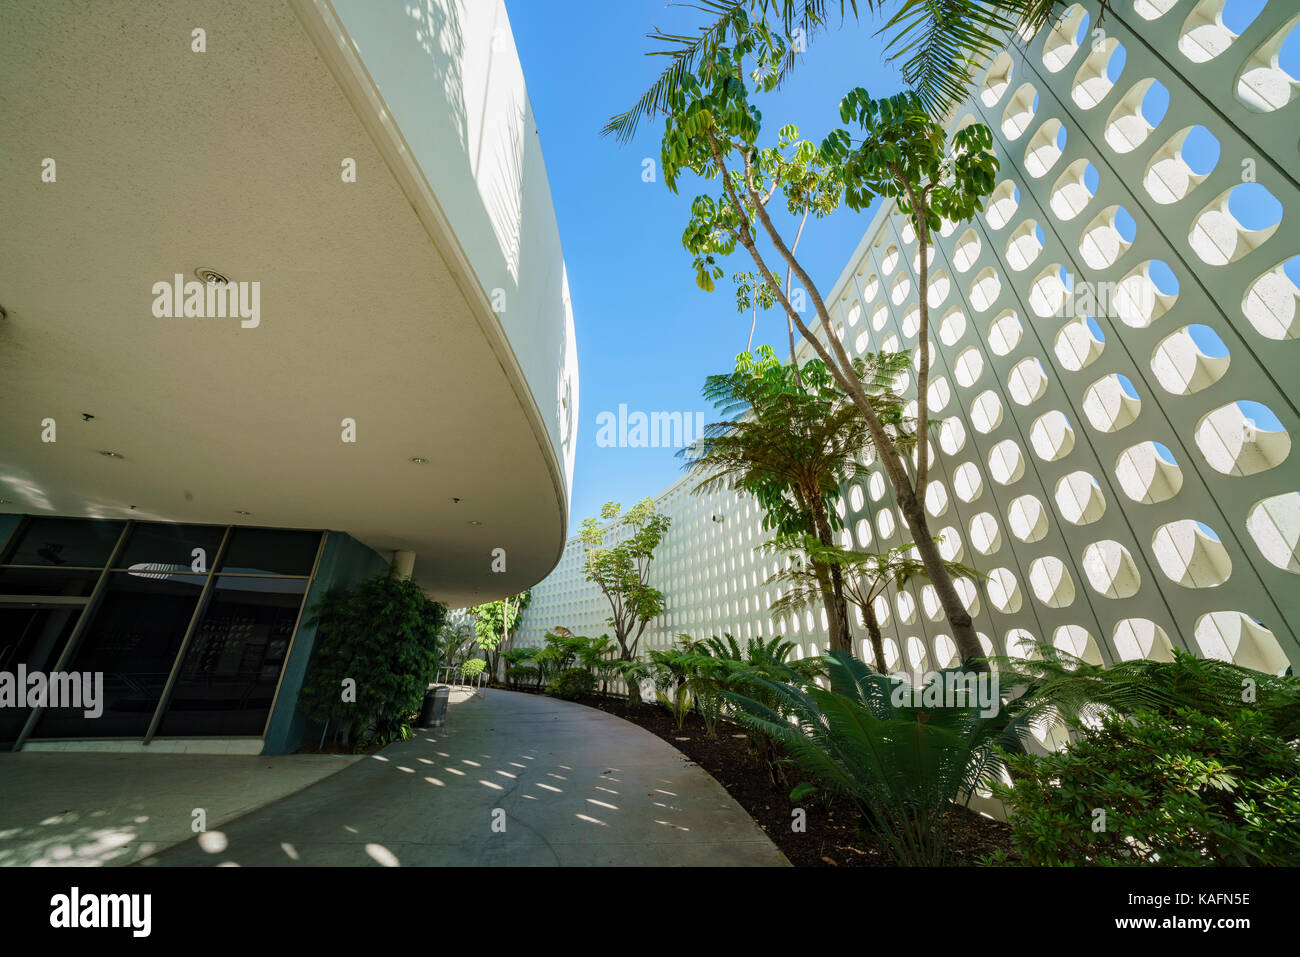 Los Angeles, SEP 24: Interior view of LAX Theme Building on SEP 24, 2017 at Los Angeles, California, United States Stock Photo